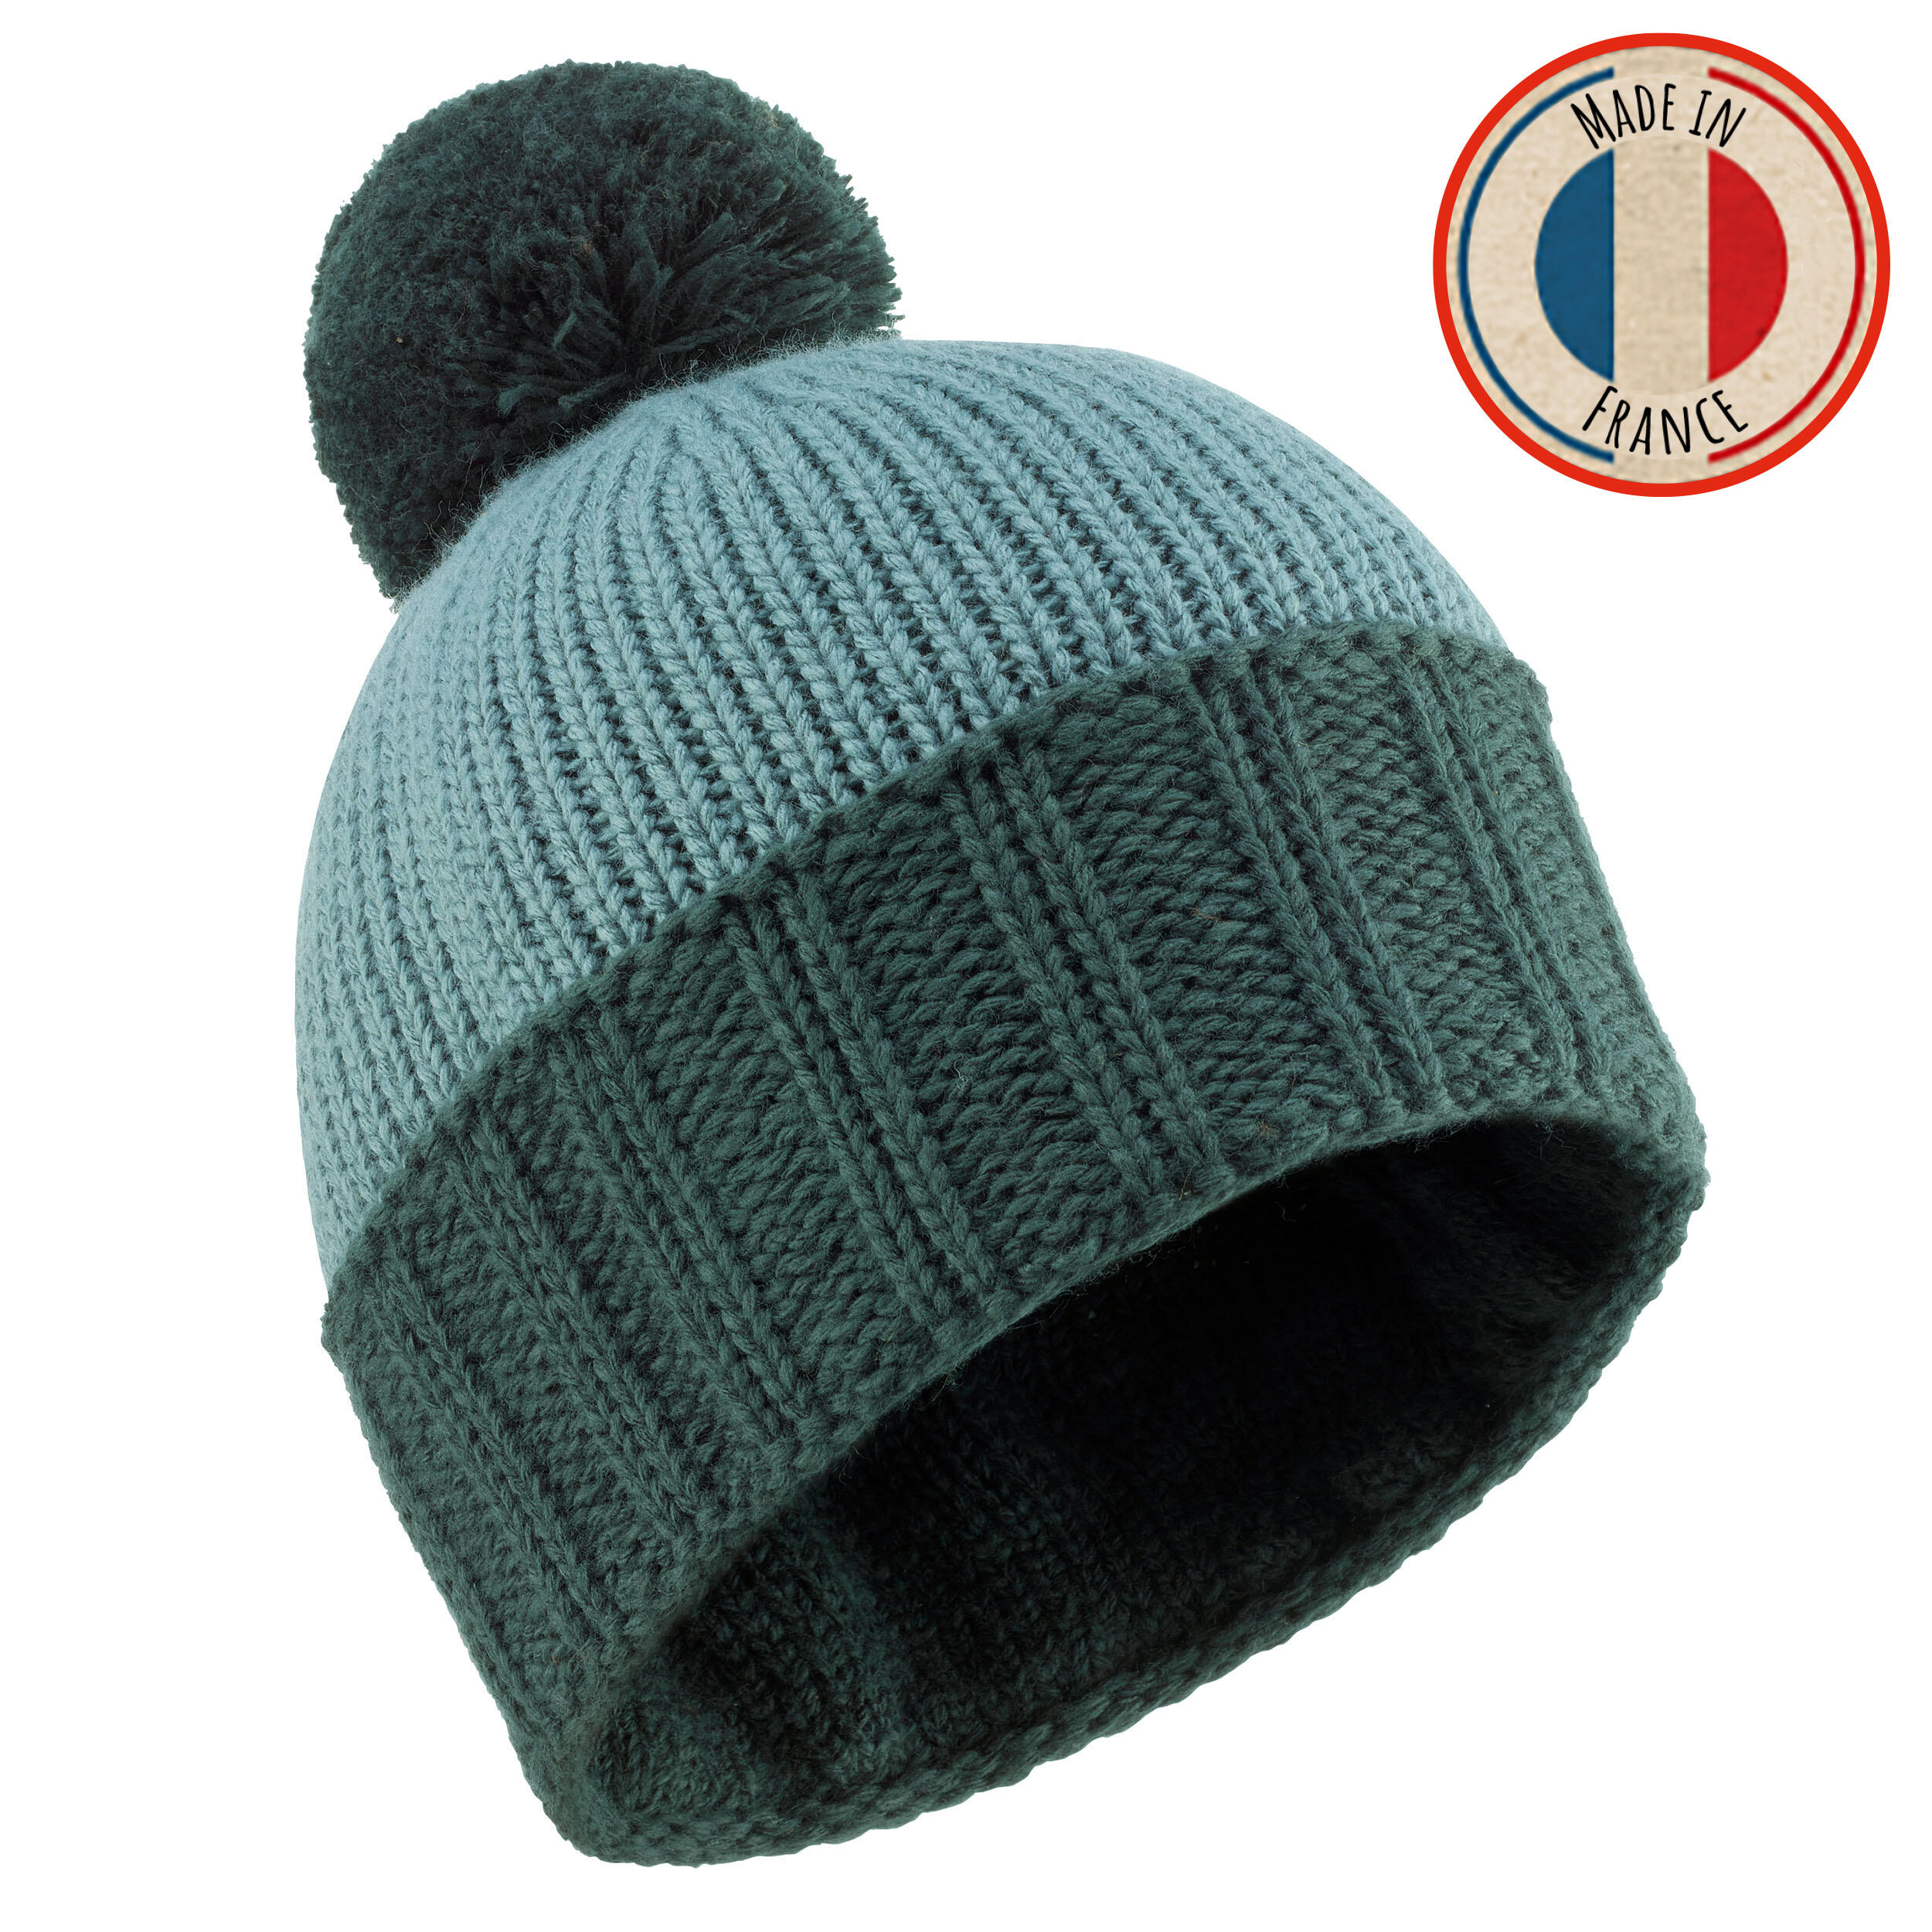 WEDZE ADULT SKI HAT GRAND NORD MADE IN FRANCE GREEN-FOREST GREEN